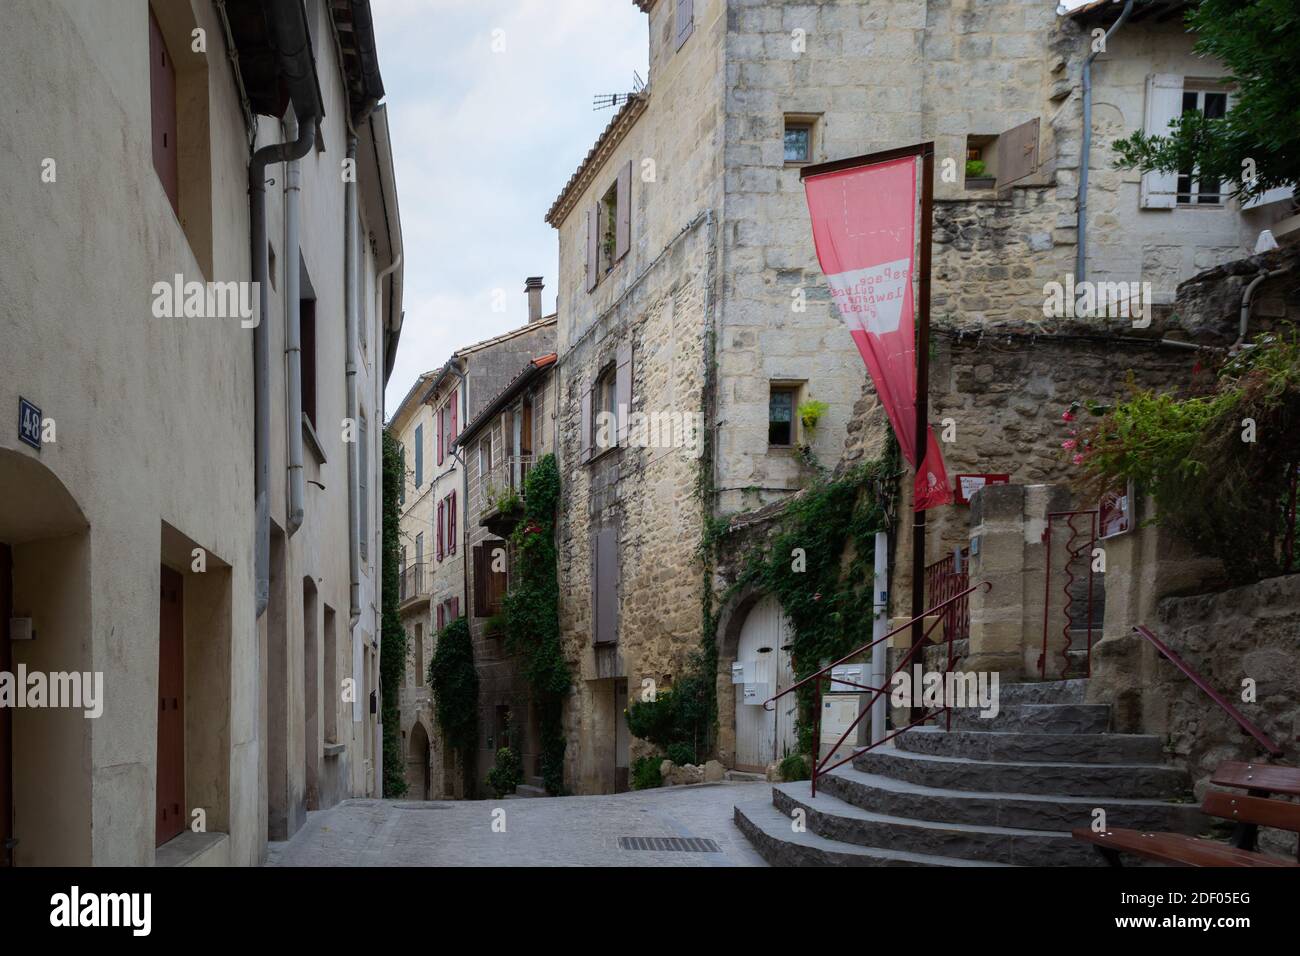 SOMMIERES, FRANCE - OCTOBER 21st, 2020: A typical street in the old town of Sommieres with beautiful old stone houses Stock Photo